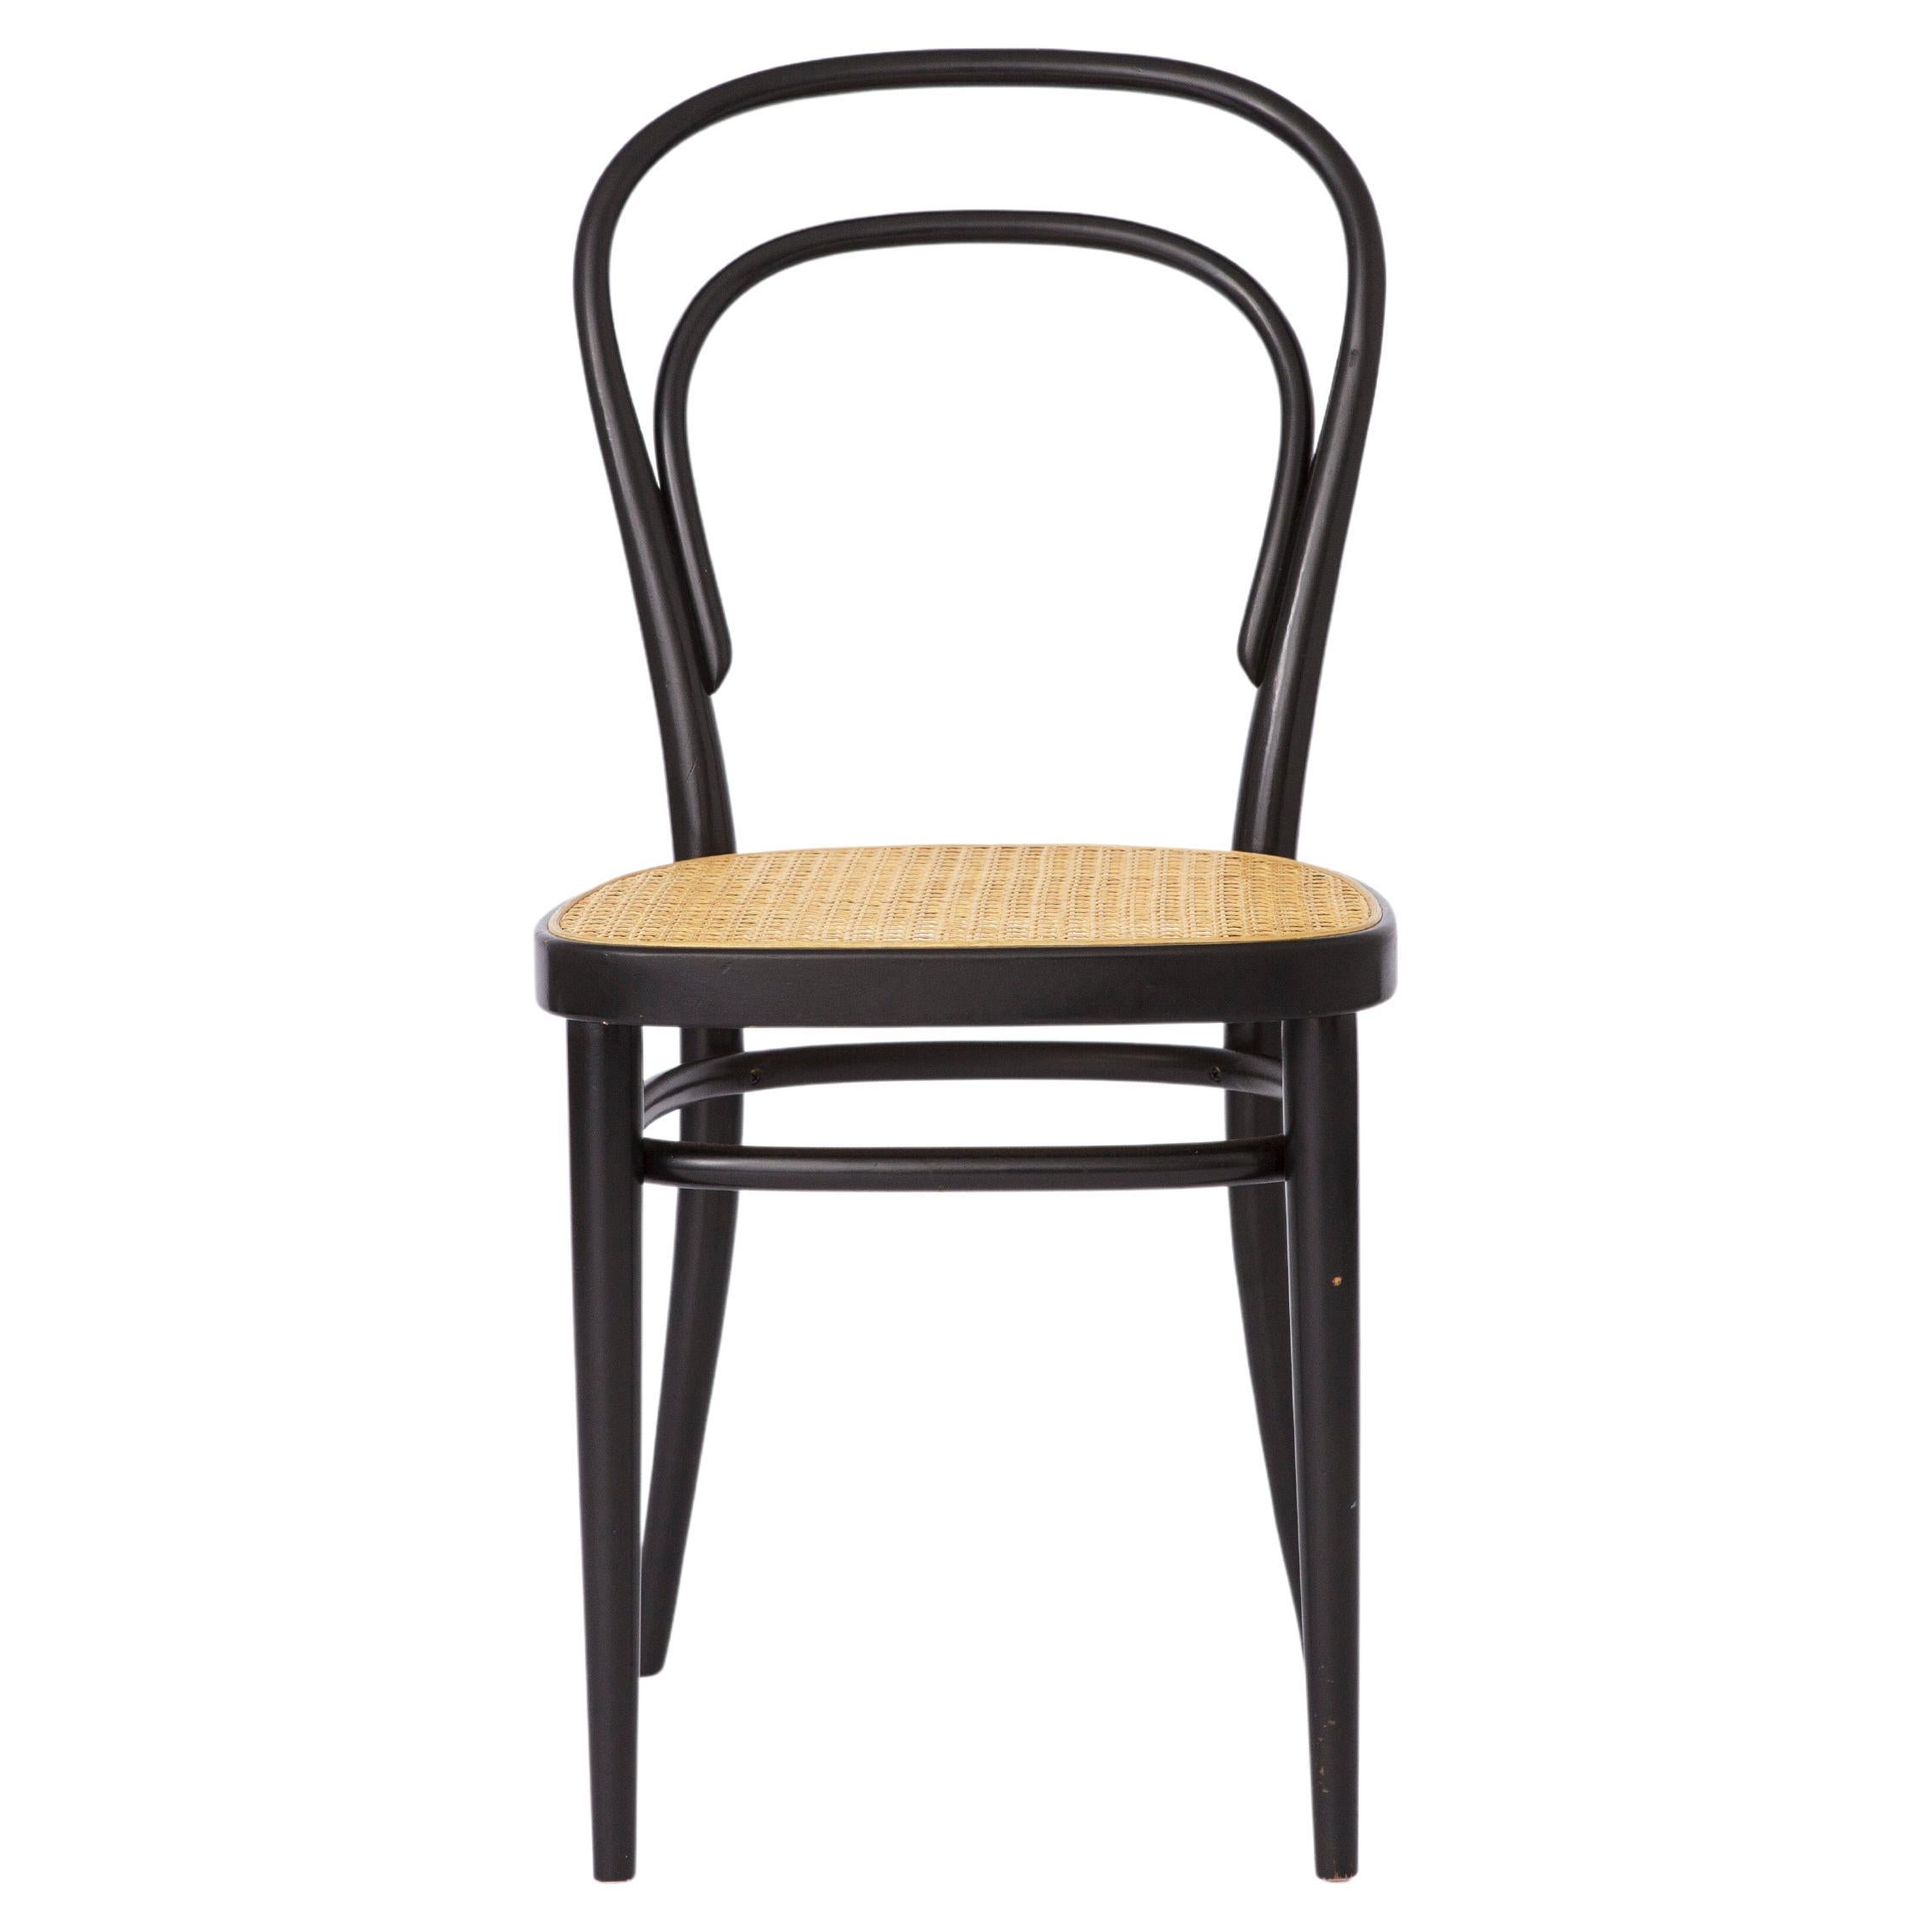 1 of 2 Thonet Dining Chair #214, Bentwood, Vintage, Austria For Sale